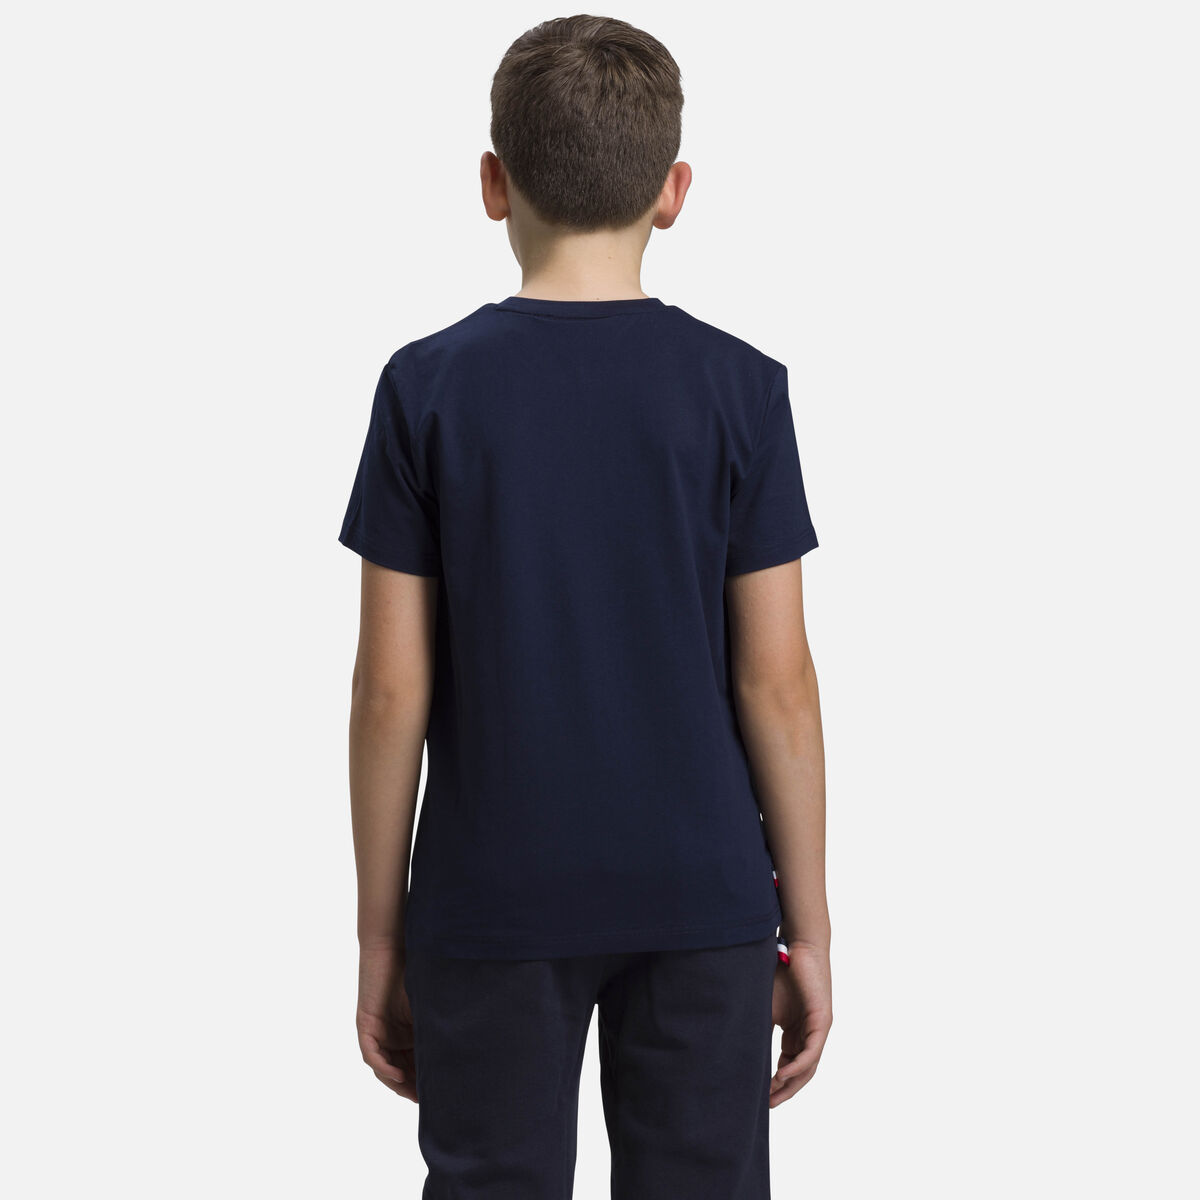 Boys' Rooster Tee